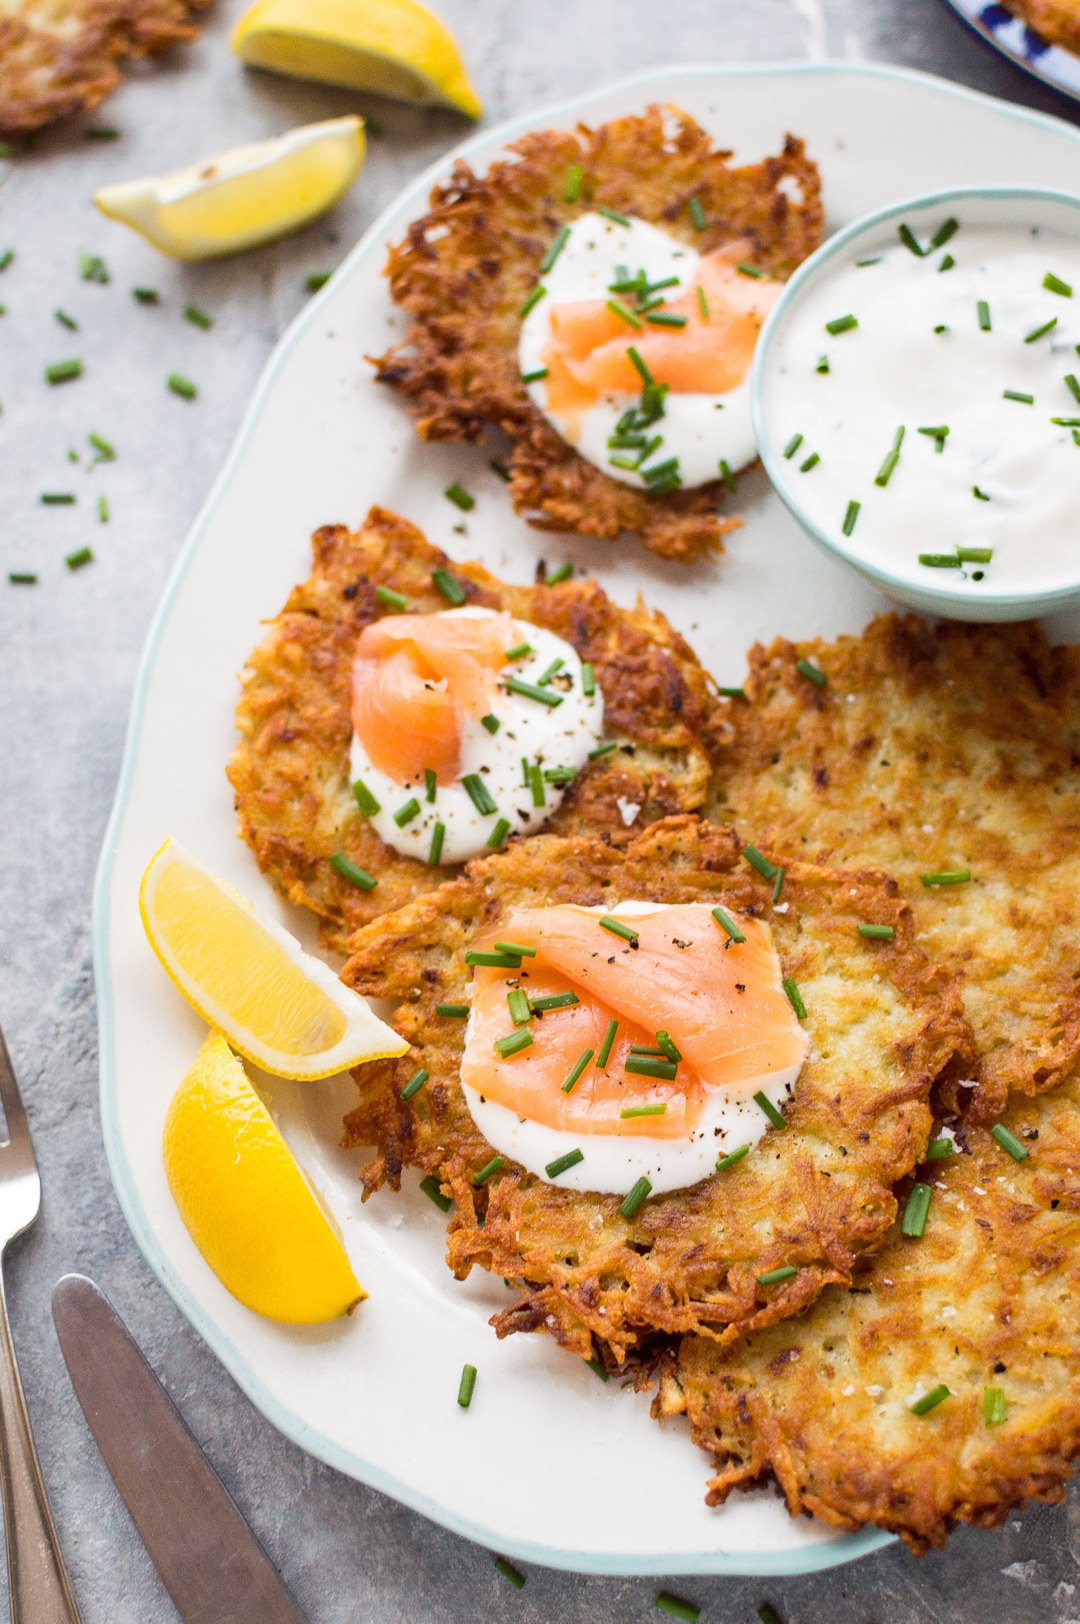 A plate of crispy potato latkes topped with sour cream, smoked salmon, and chives.